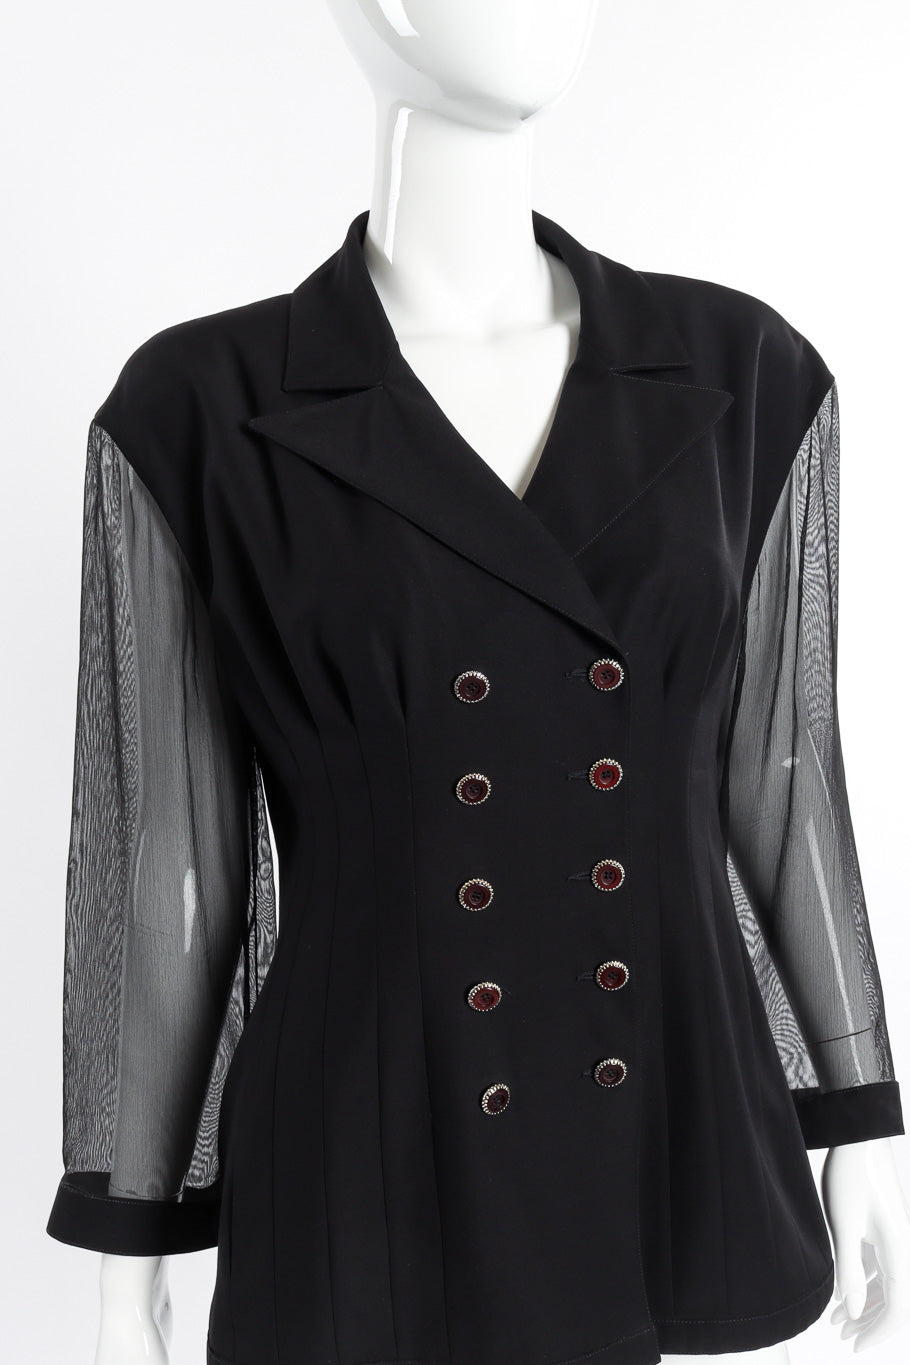 Vintage Karl Lagerfeld Double Breasted Sheer Jacket front on mannequin closeup @recessla